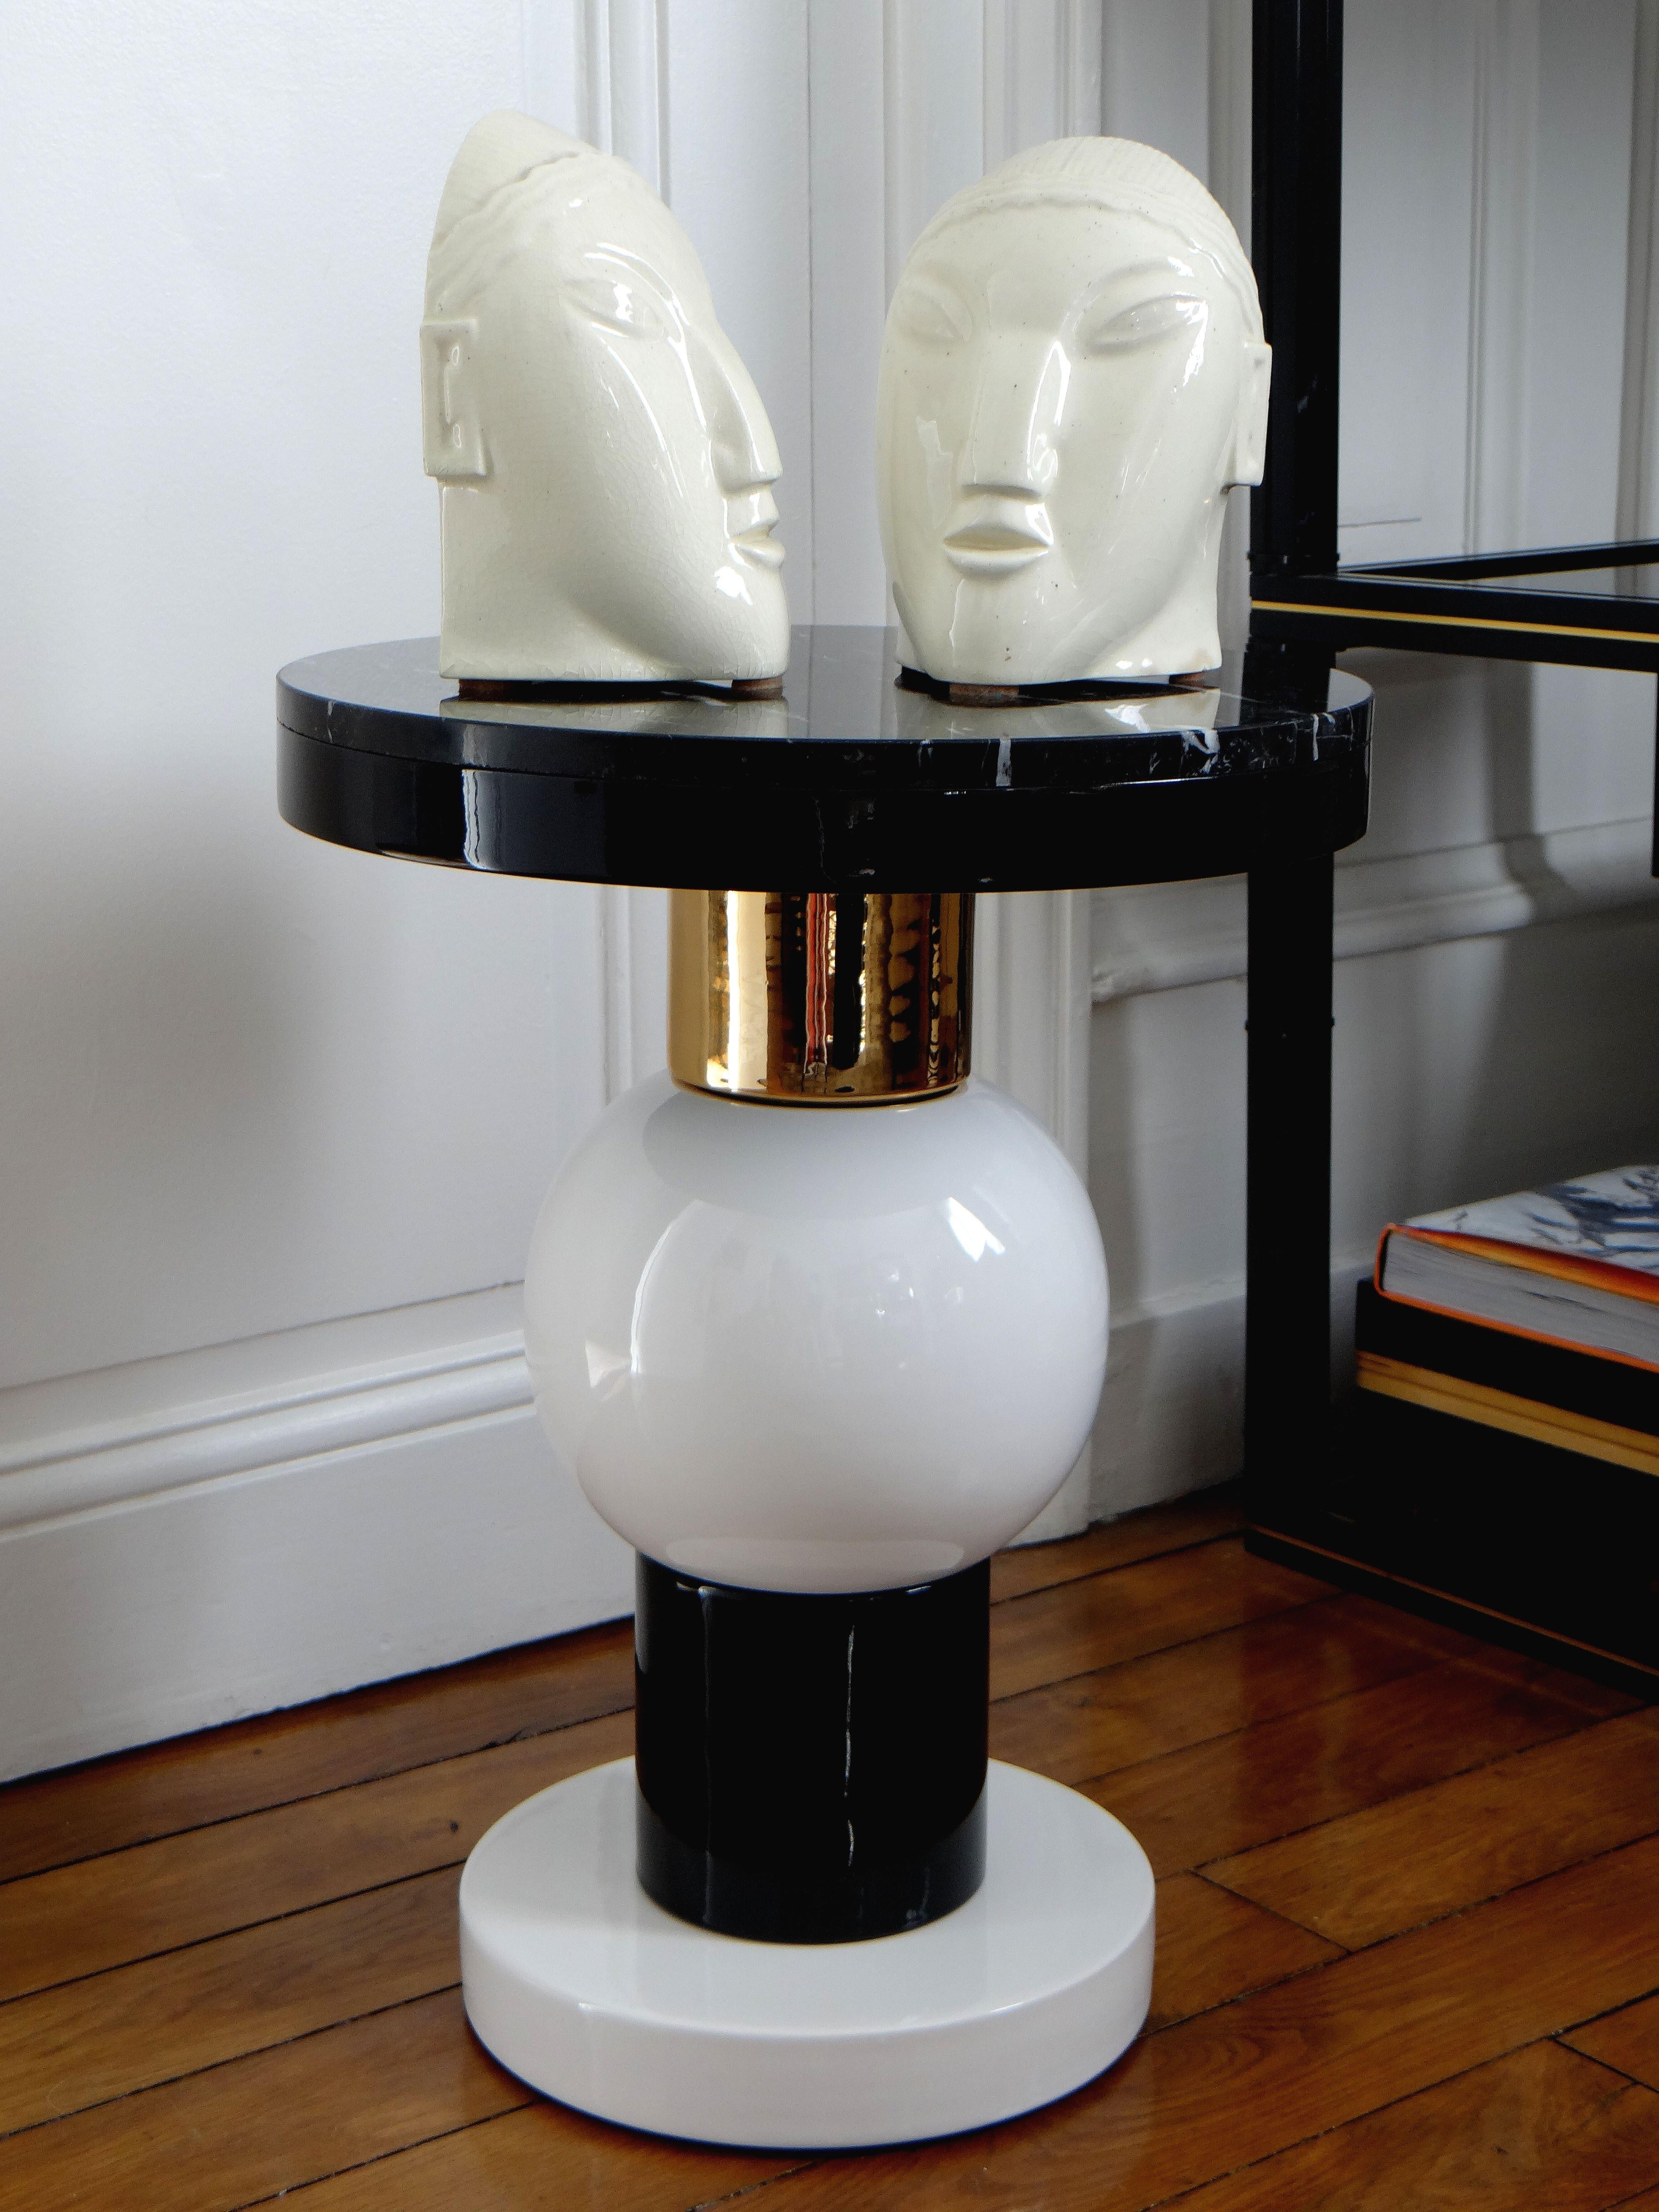 French Pair of Table or Pedestal Table, Contemporary Creation on Ceramic, 2018